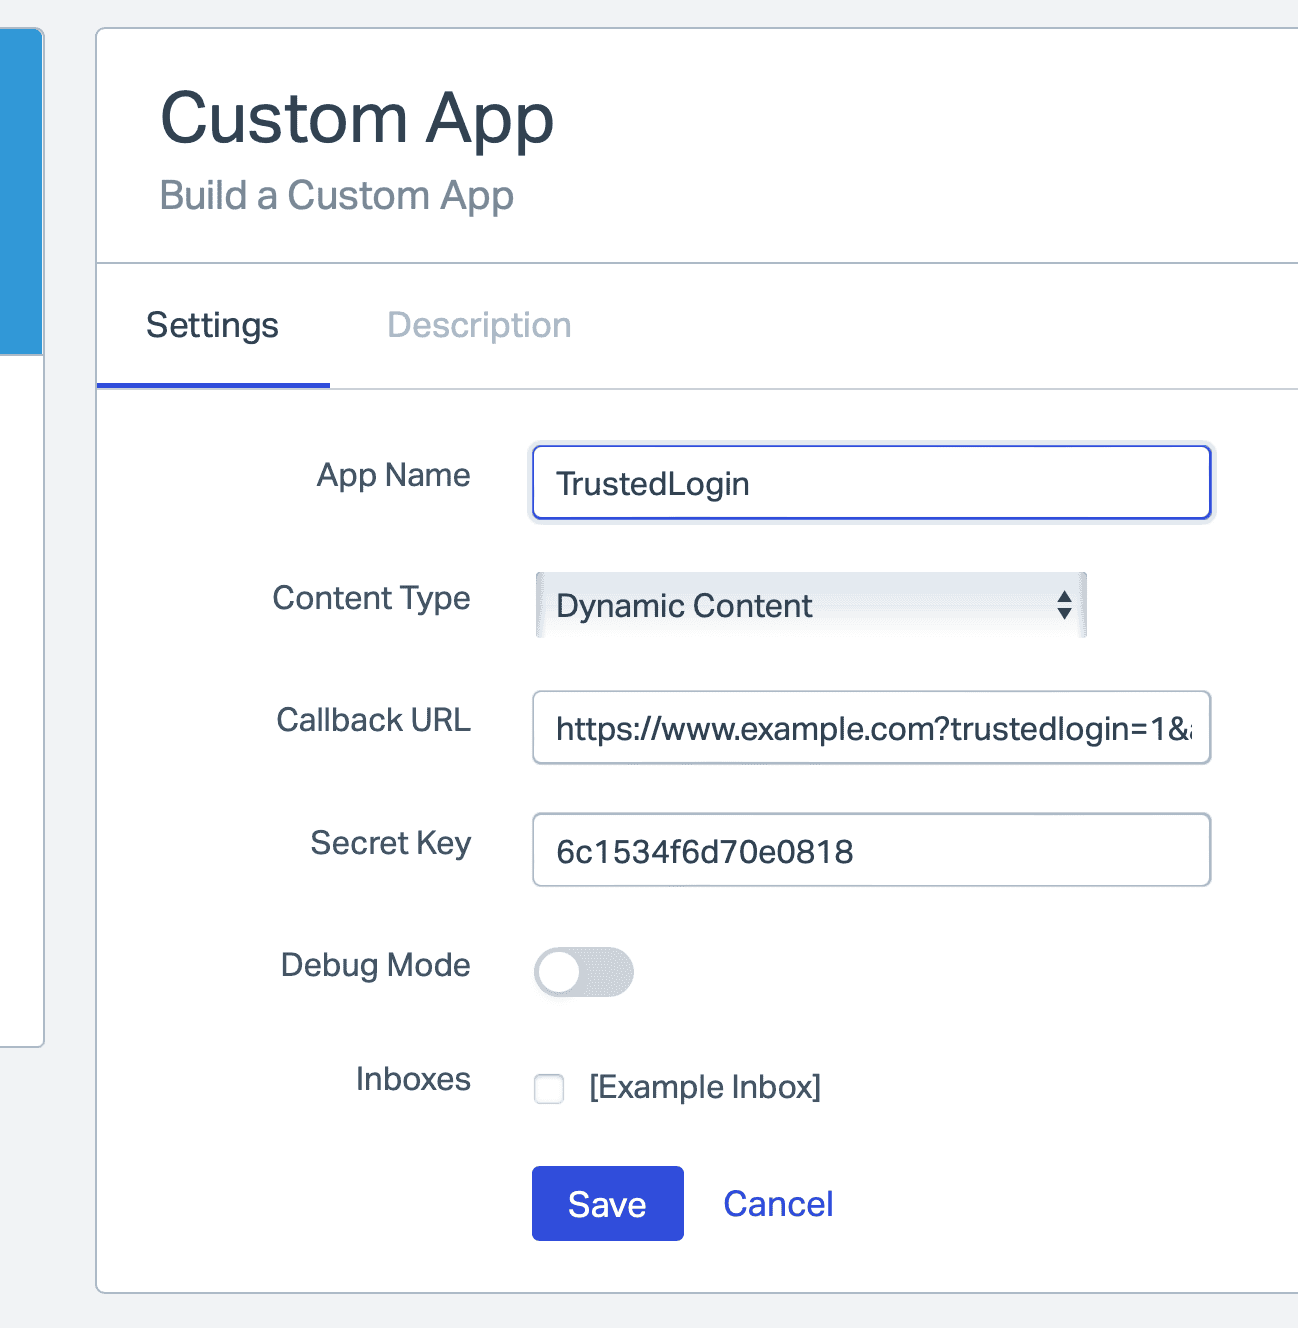 &quot;Custom App&quot; form with App Name, Content Type, Callback URL, Secret Key, Debug Mode, and Inboxes fields